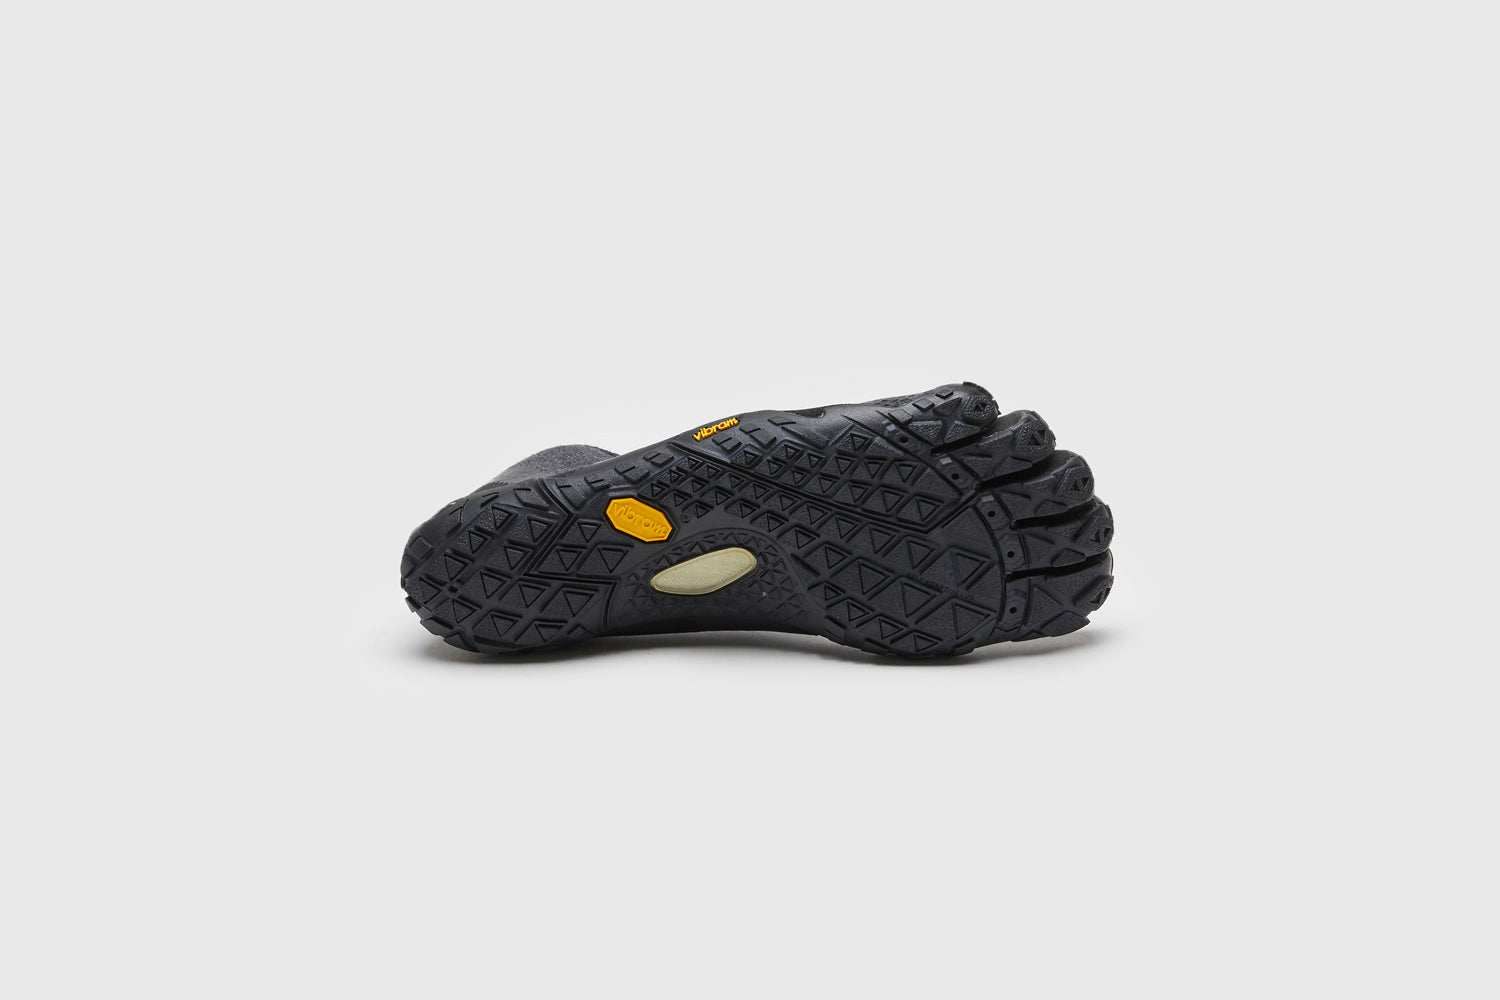 SUICOKE NIN-LO shoes with black nylon upper, black midsole and sole, strap and logo patch. From Spring/Summer 2023 collection on eightywingold Web Store, an official partner of SUICOKE. S20WLC BLACK